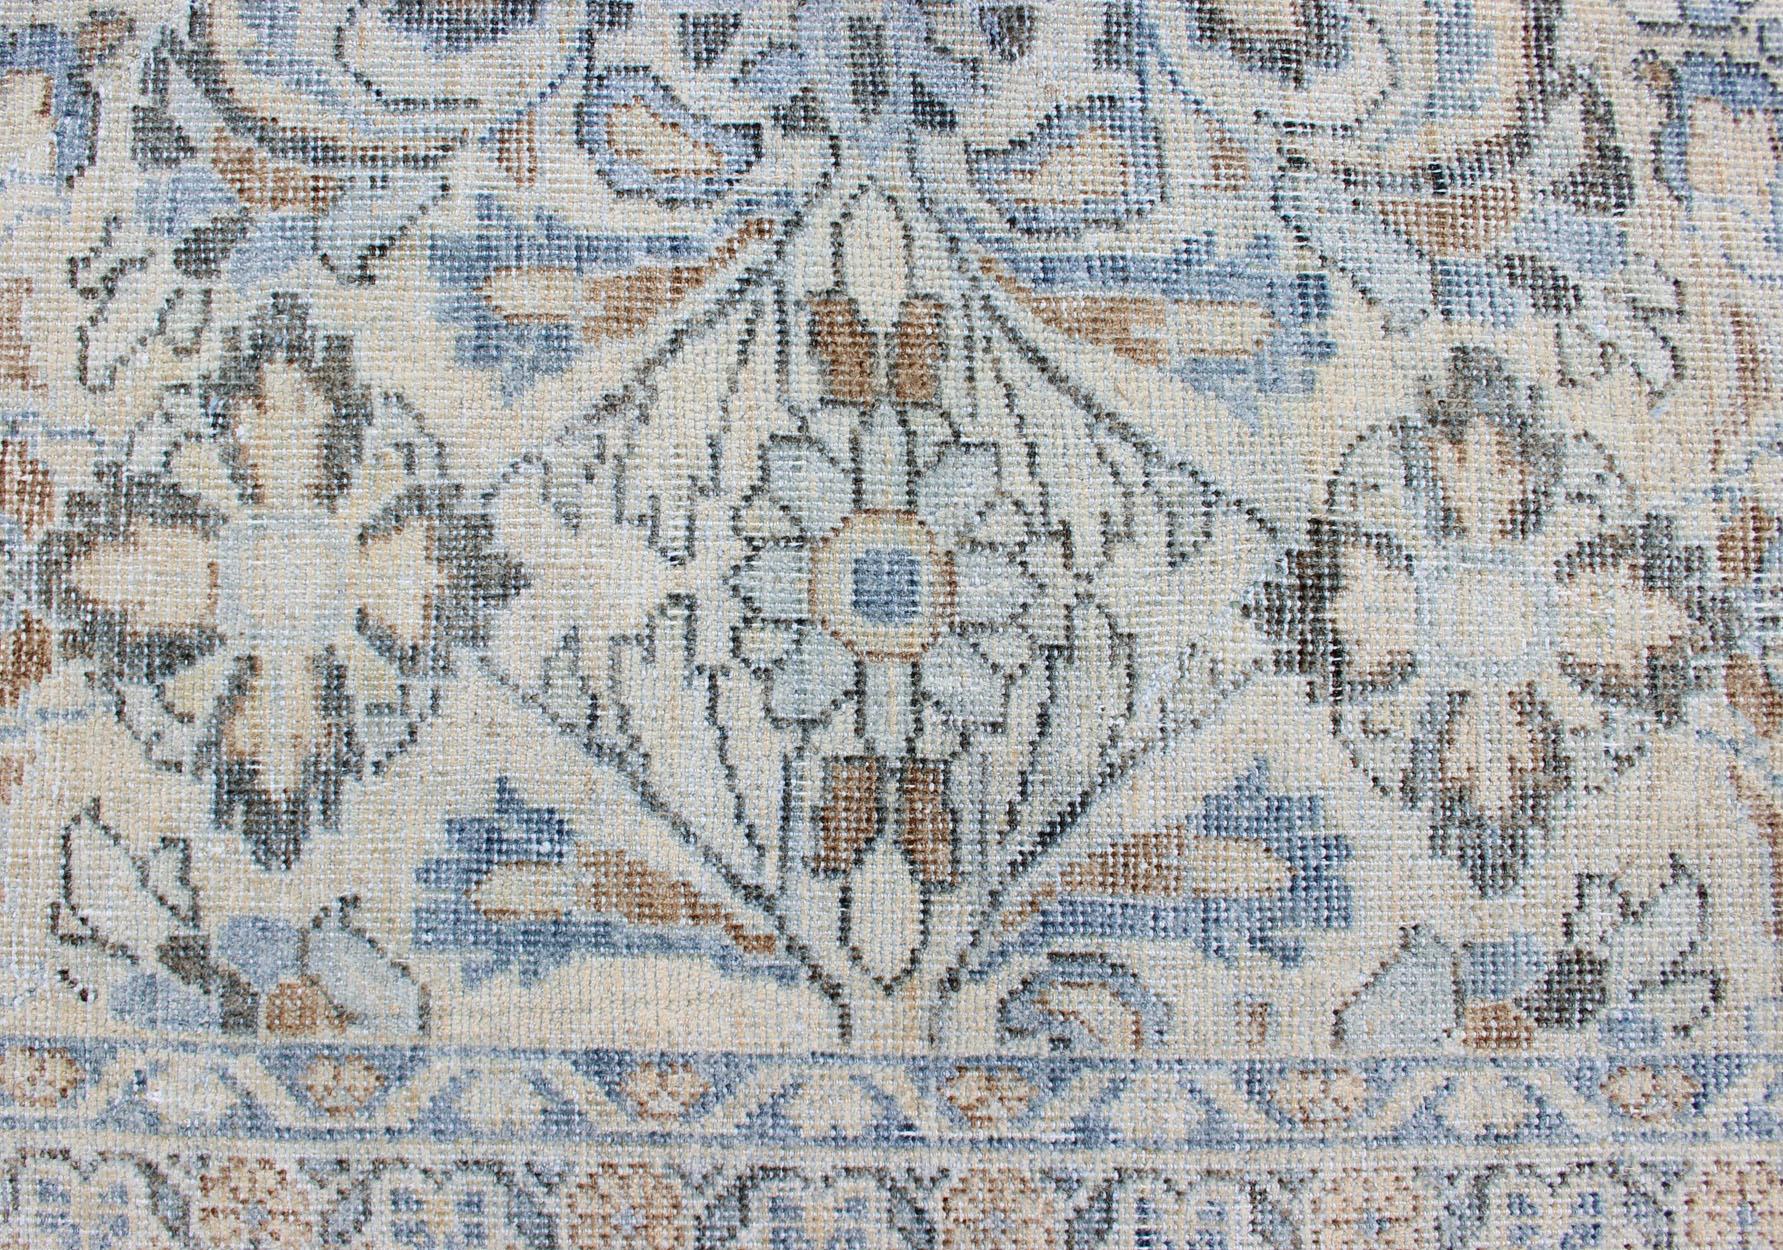 Antique Persian Mahal Rug with Sub Floral Design in Blue, Charcoal & Cream 12